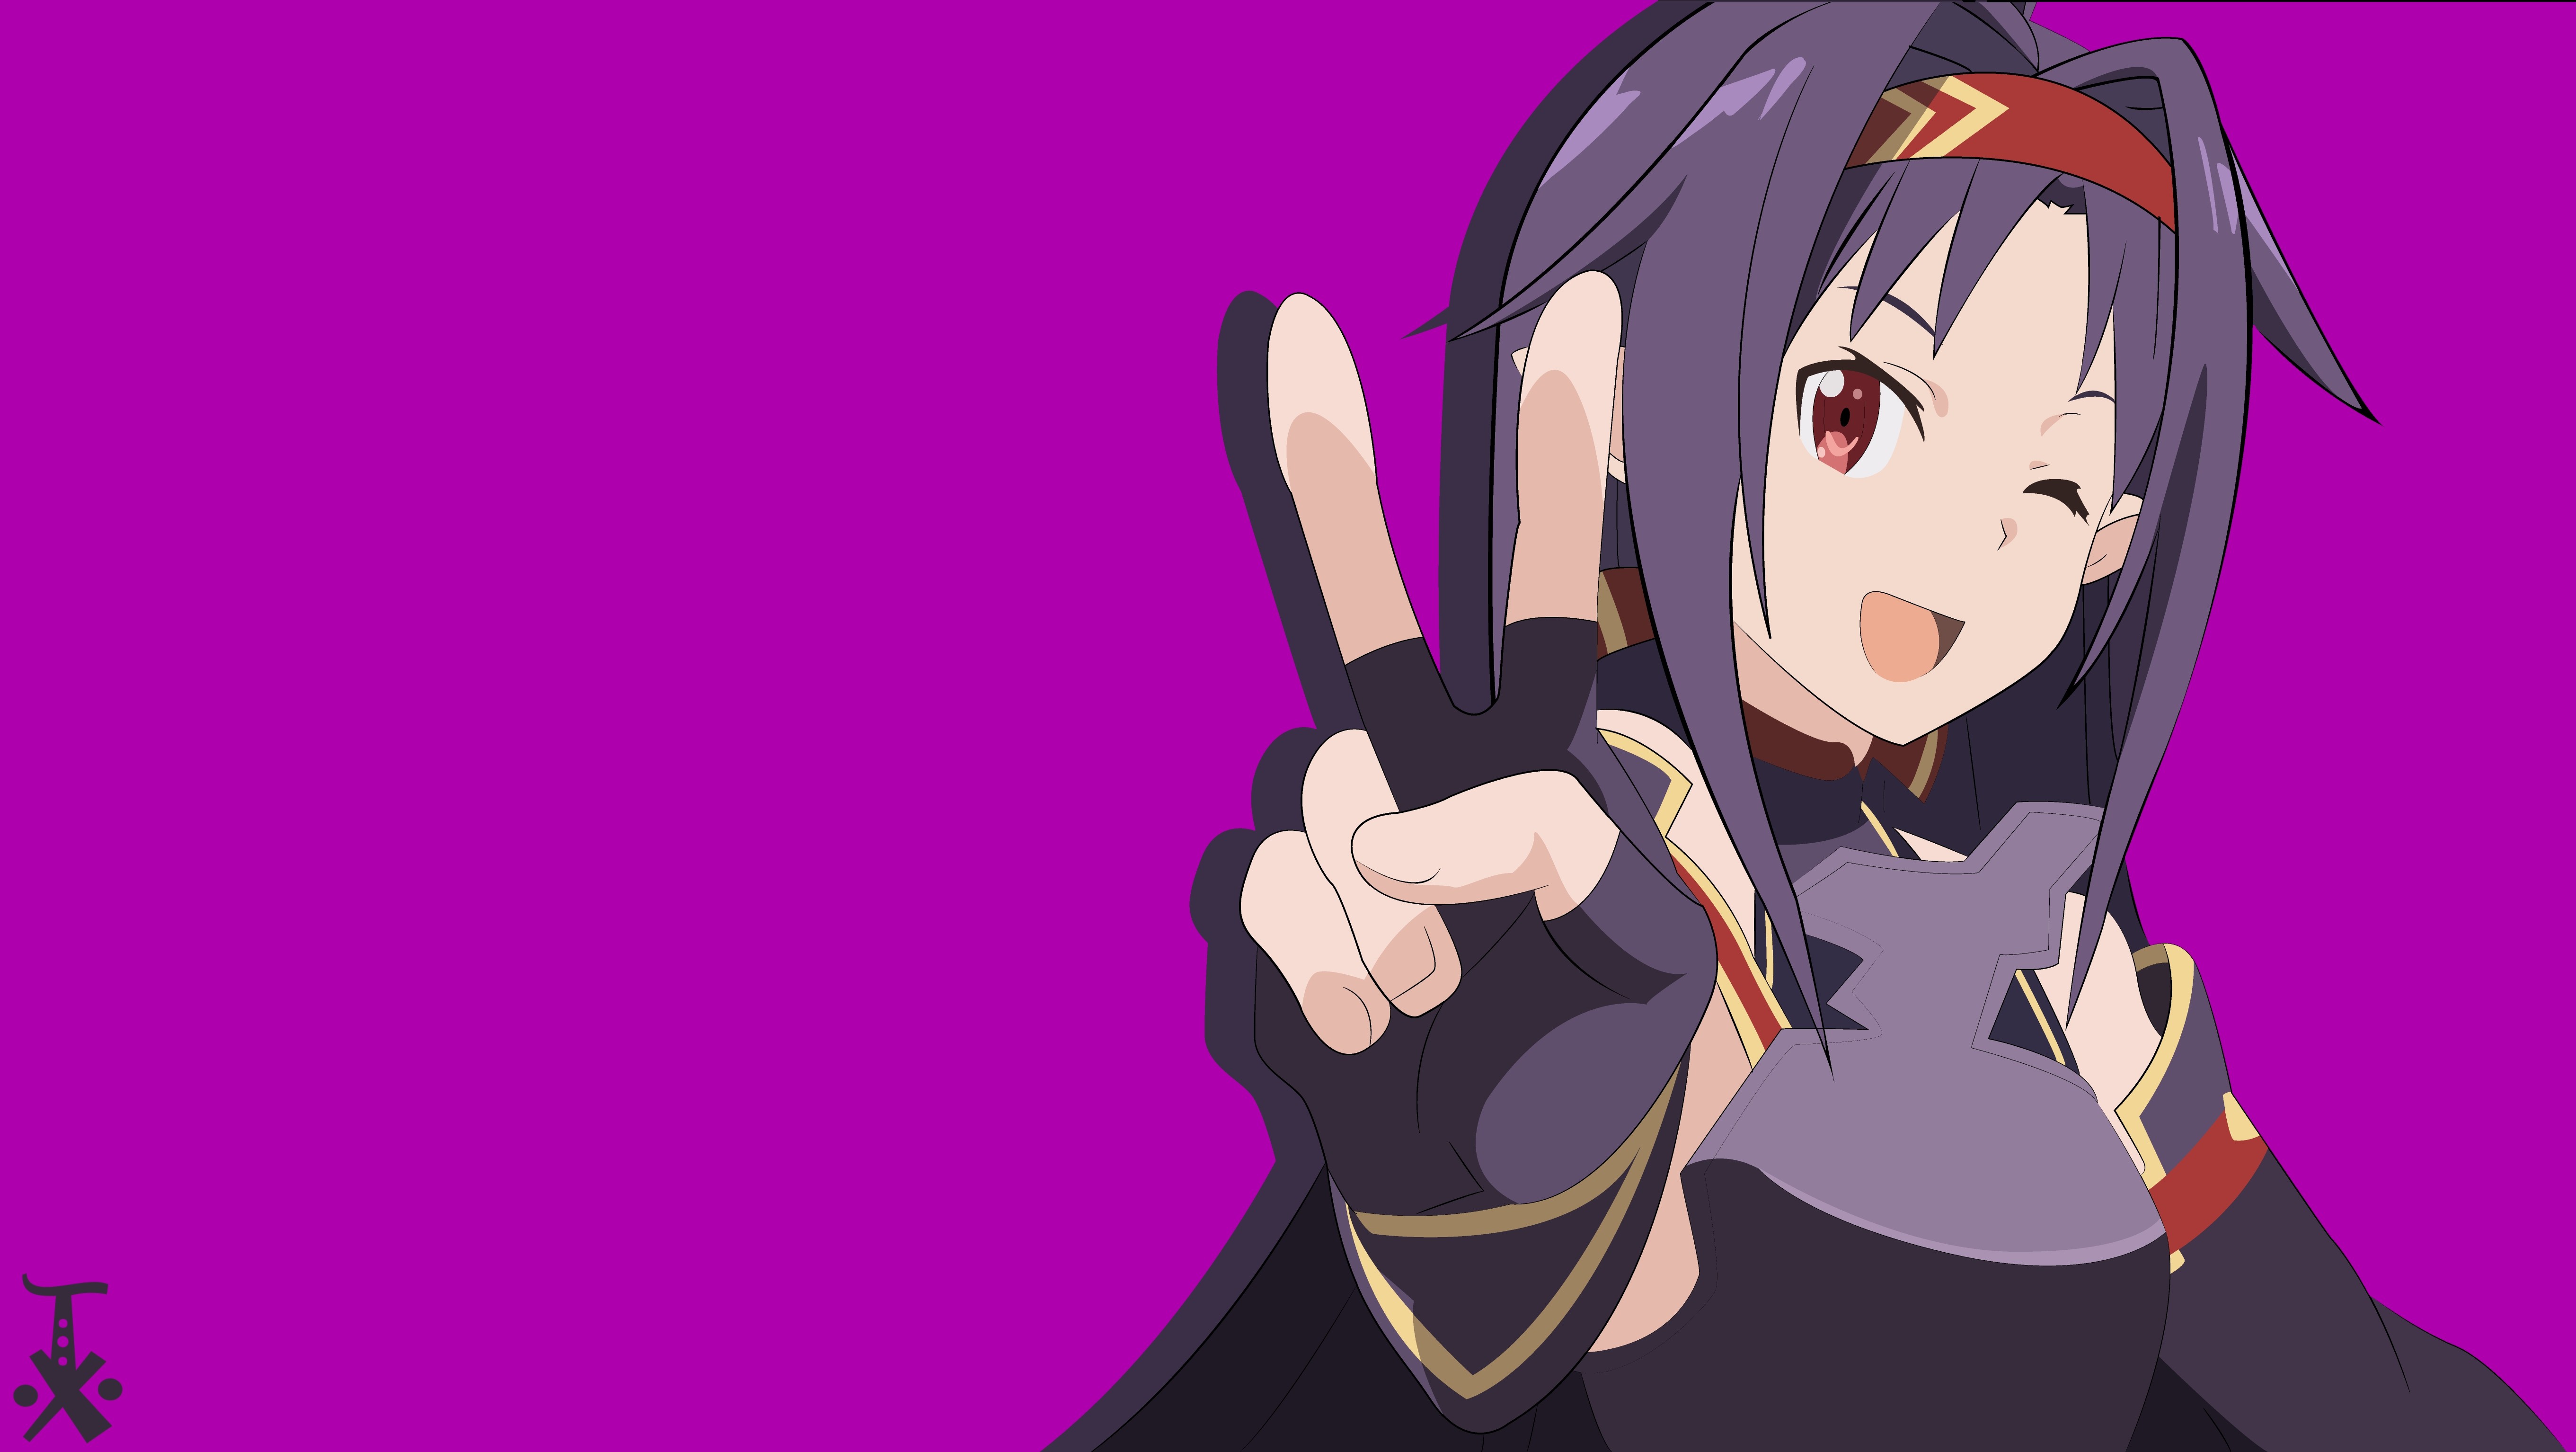 Anime 5443x3067 anime girls anime Sword Art Online Konno Yuuki pink background wink peace sign simple background victory sign red eyes open mouth hand gesture